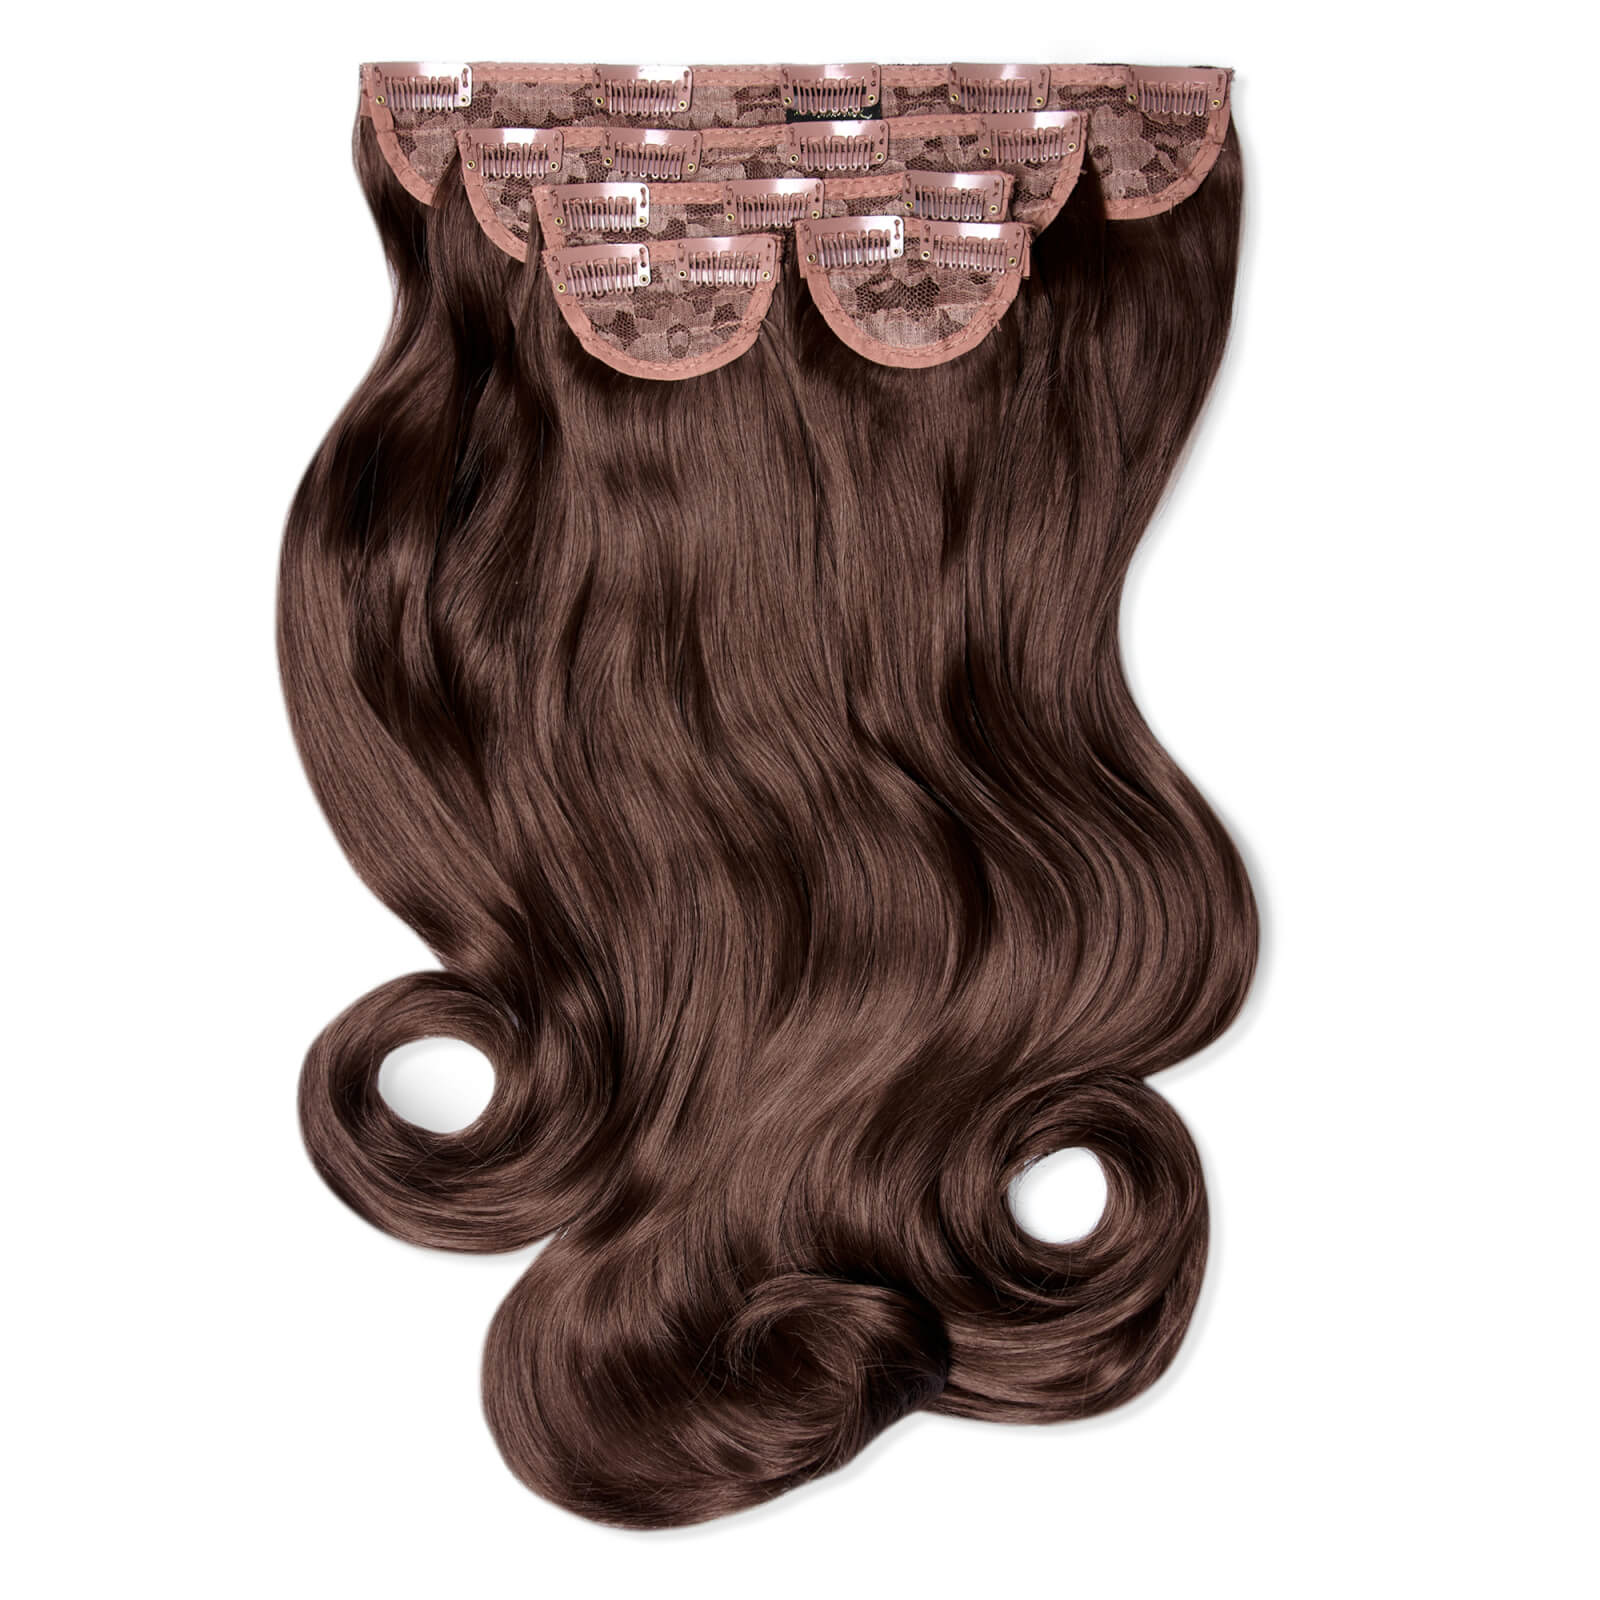 Lullabellz Super Thick 22  5 Piece Natural Wavy Clip In Extensions (various Shades) - Chestnut